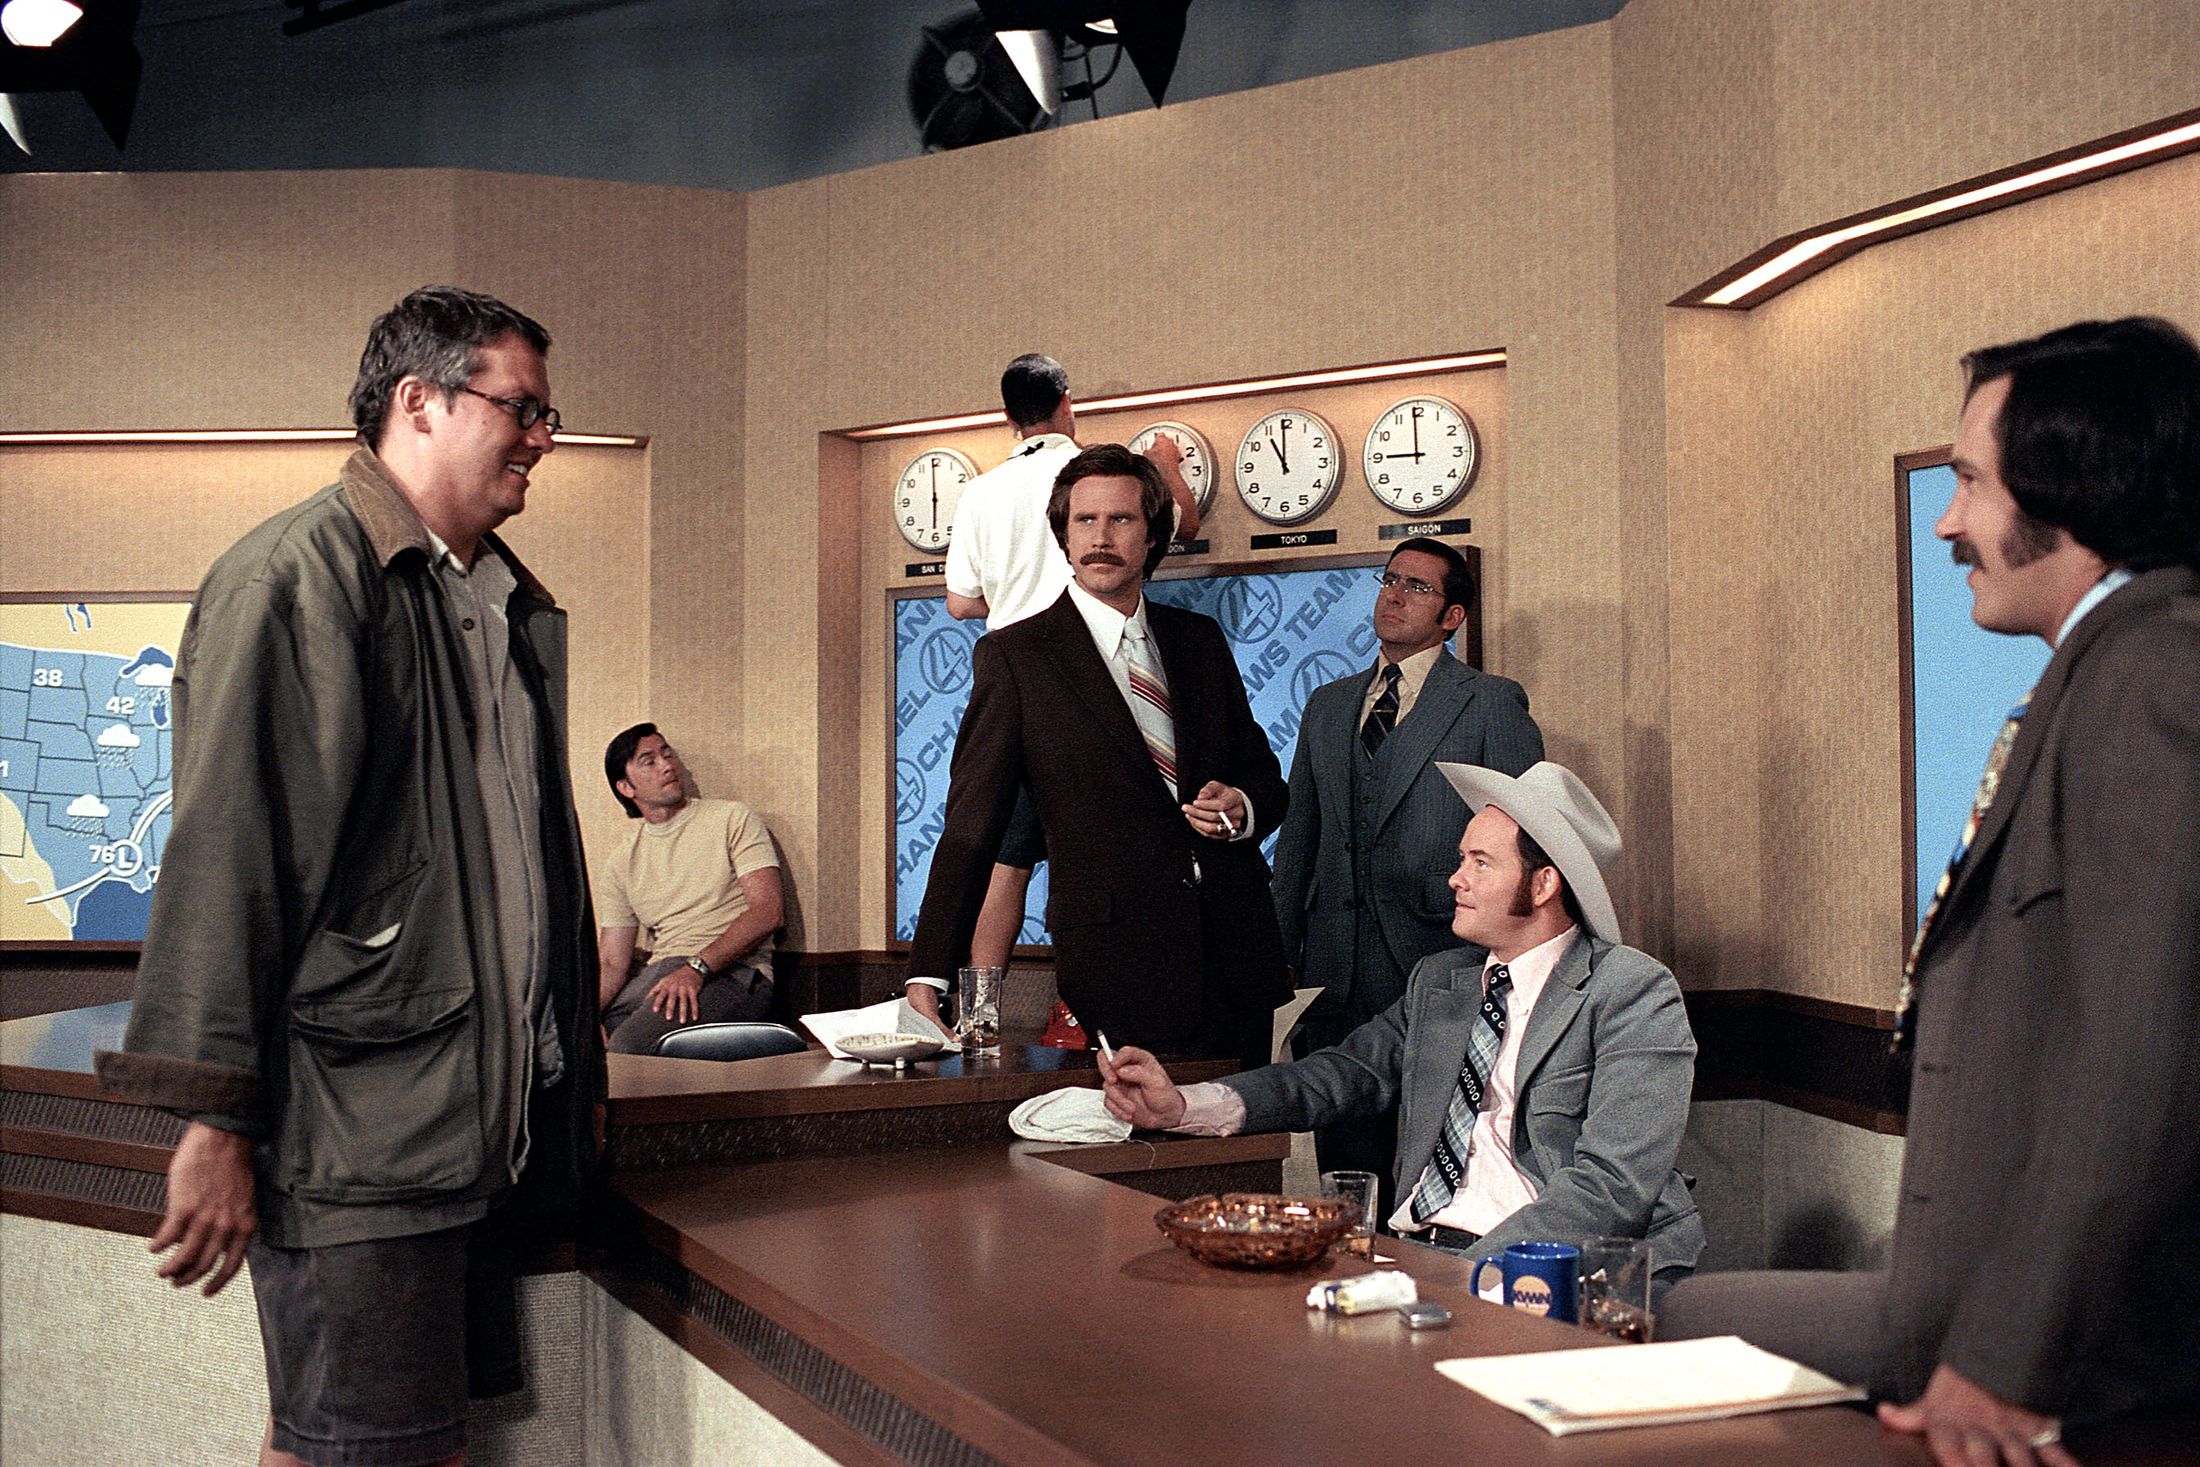 On the Anchorman set, improv-comedy masters had the freedom to reimagine the film one line at a time.